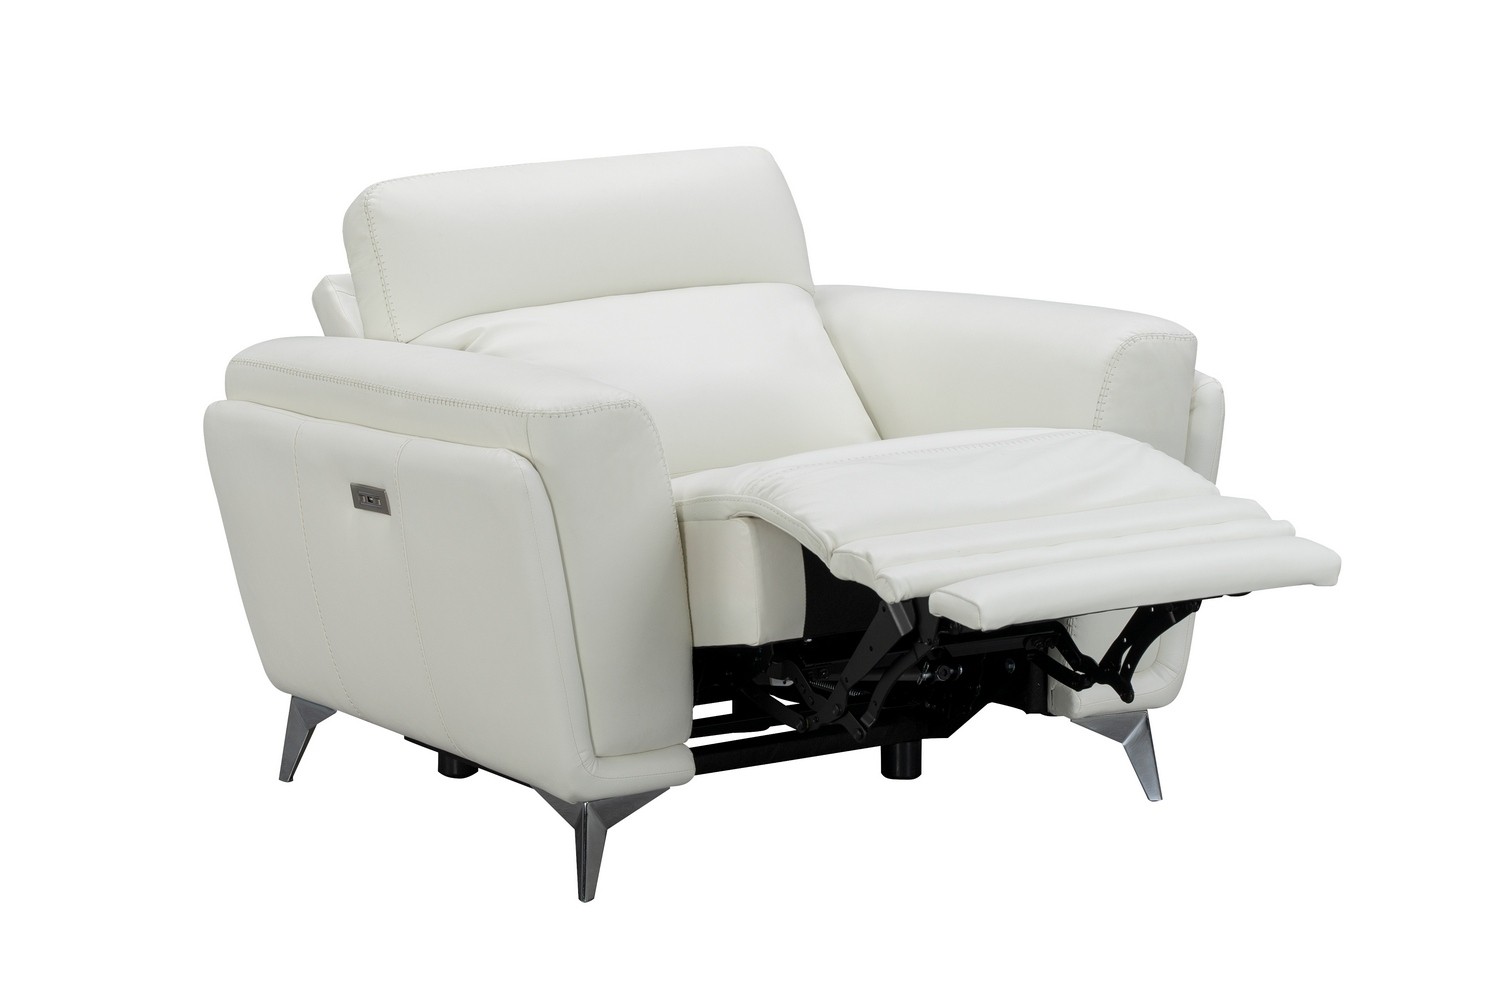 Barcalounger Cameron Power Recliner Chair with Power Head Rest - Enzo Winter White/Leather Match